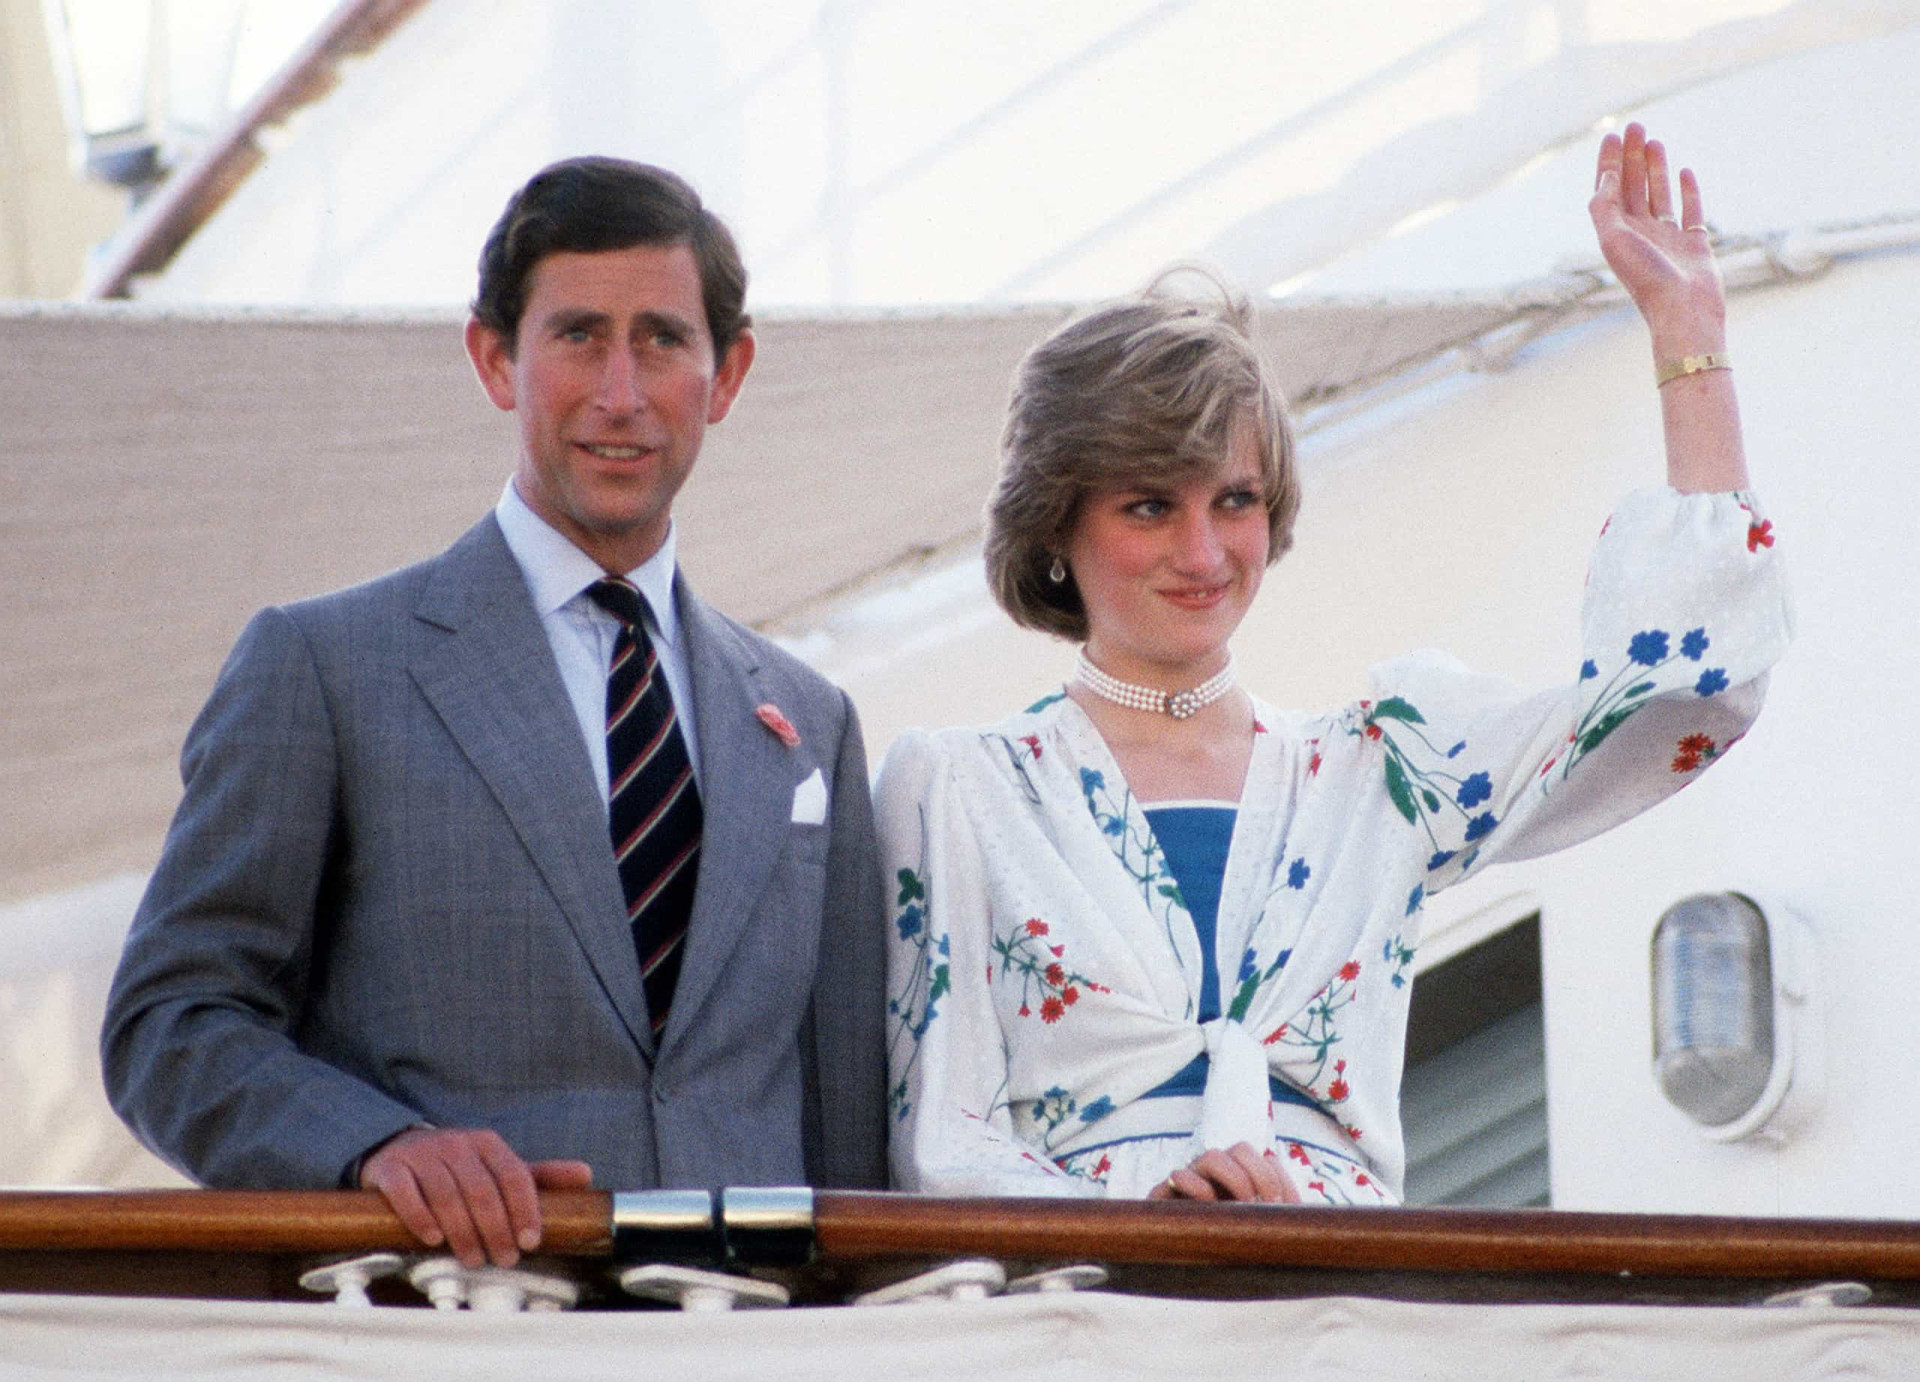 <p>The newly-wedded Prince Charles and <a href="https://www.starsinsider.com/lifestyle/395304/how-princess-dianas-sons-continue-her-legacy-today" rel="noopener">Diana</a>, Princess of Wales leave Gibraltar on <em>Britannia</em> for their honeymoon cruise, which commenced on July 31, 1981.</p><p>You may also like:<a href="https://www.starsinsider.com/n/359032?utm_source=msn.com&utm_medium=display&utm_campaign=referral_description&utm_content=474709v3en-ph"> Ces acteurs ont détesté leur personnage à l'écran</a></p>